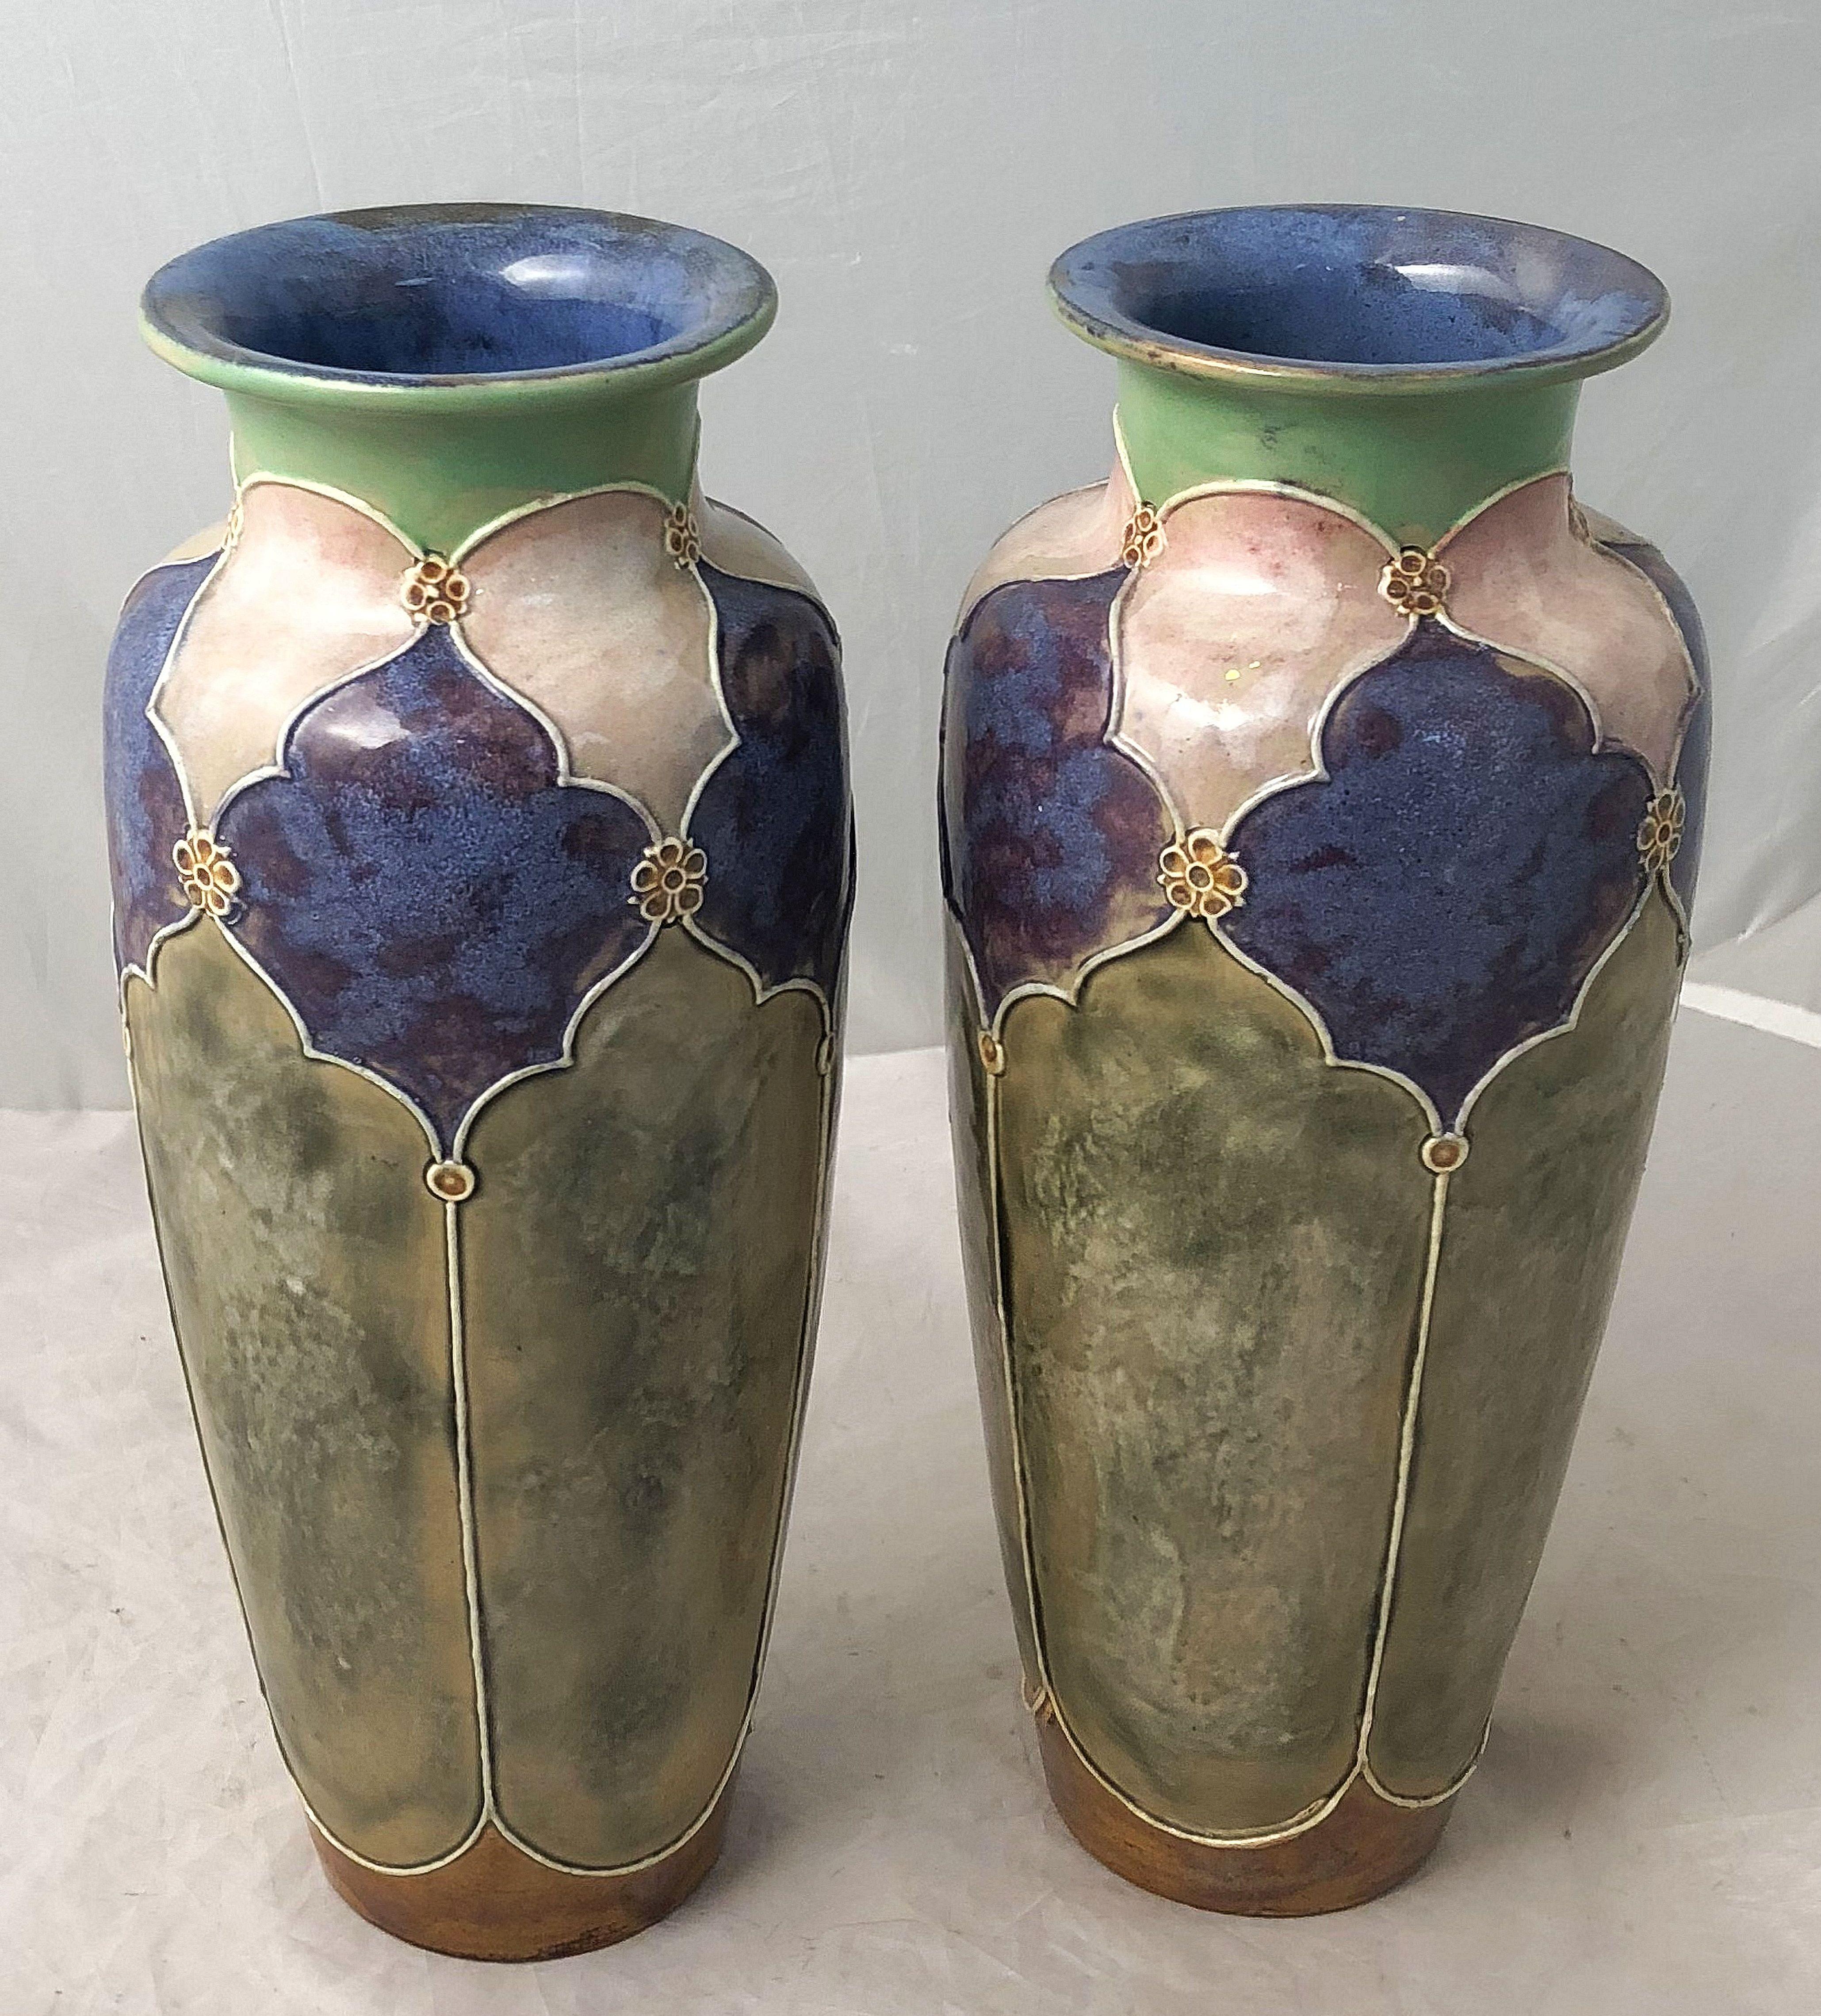 A Fine pair of decorative ceramic vases from the Arts & Crafts period, by the celebrated English pottery firm, Royal Doulton. 
Each vase featuring a Moorish design around the circumference. 
Impressed mark to base.

Priced as a pair - $1895 the